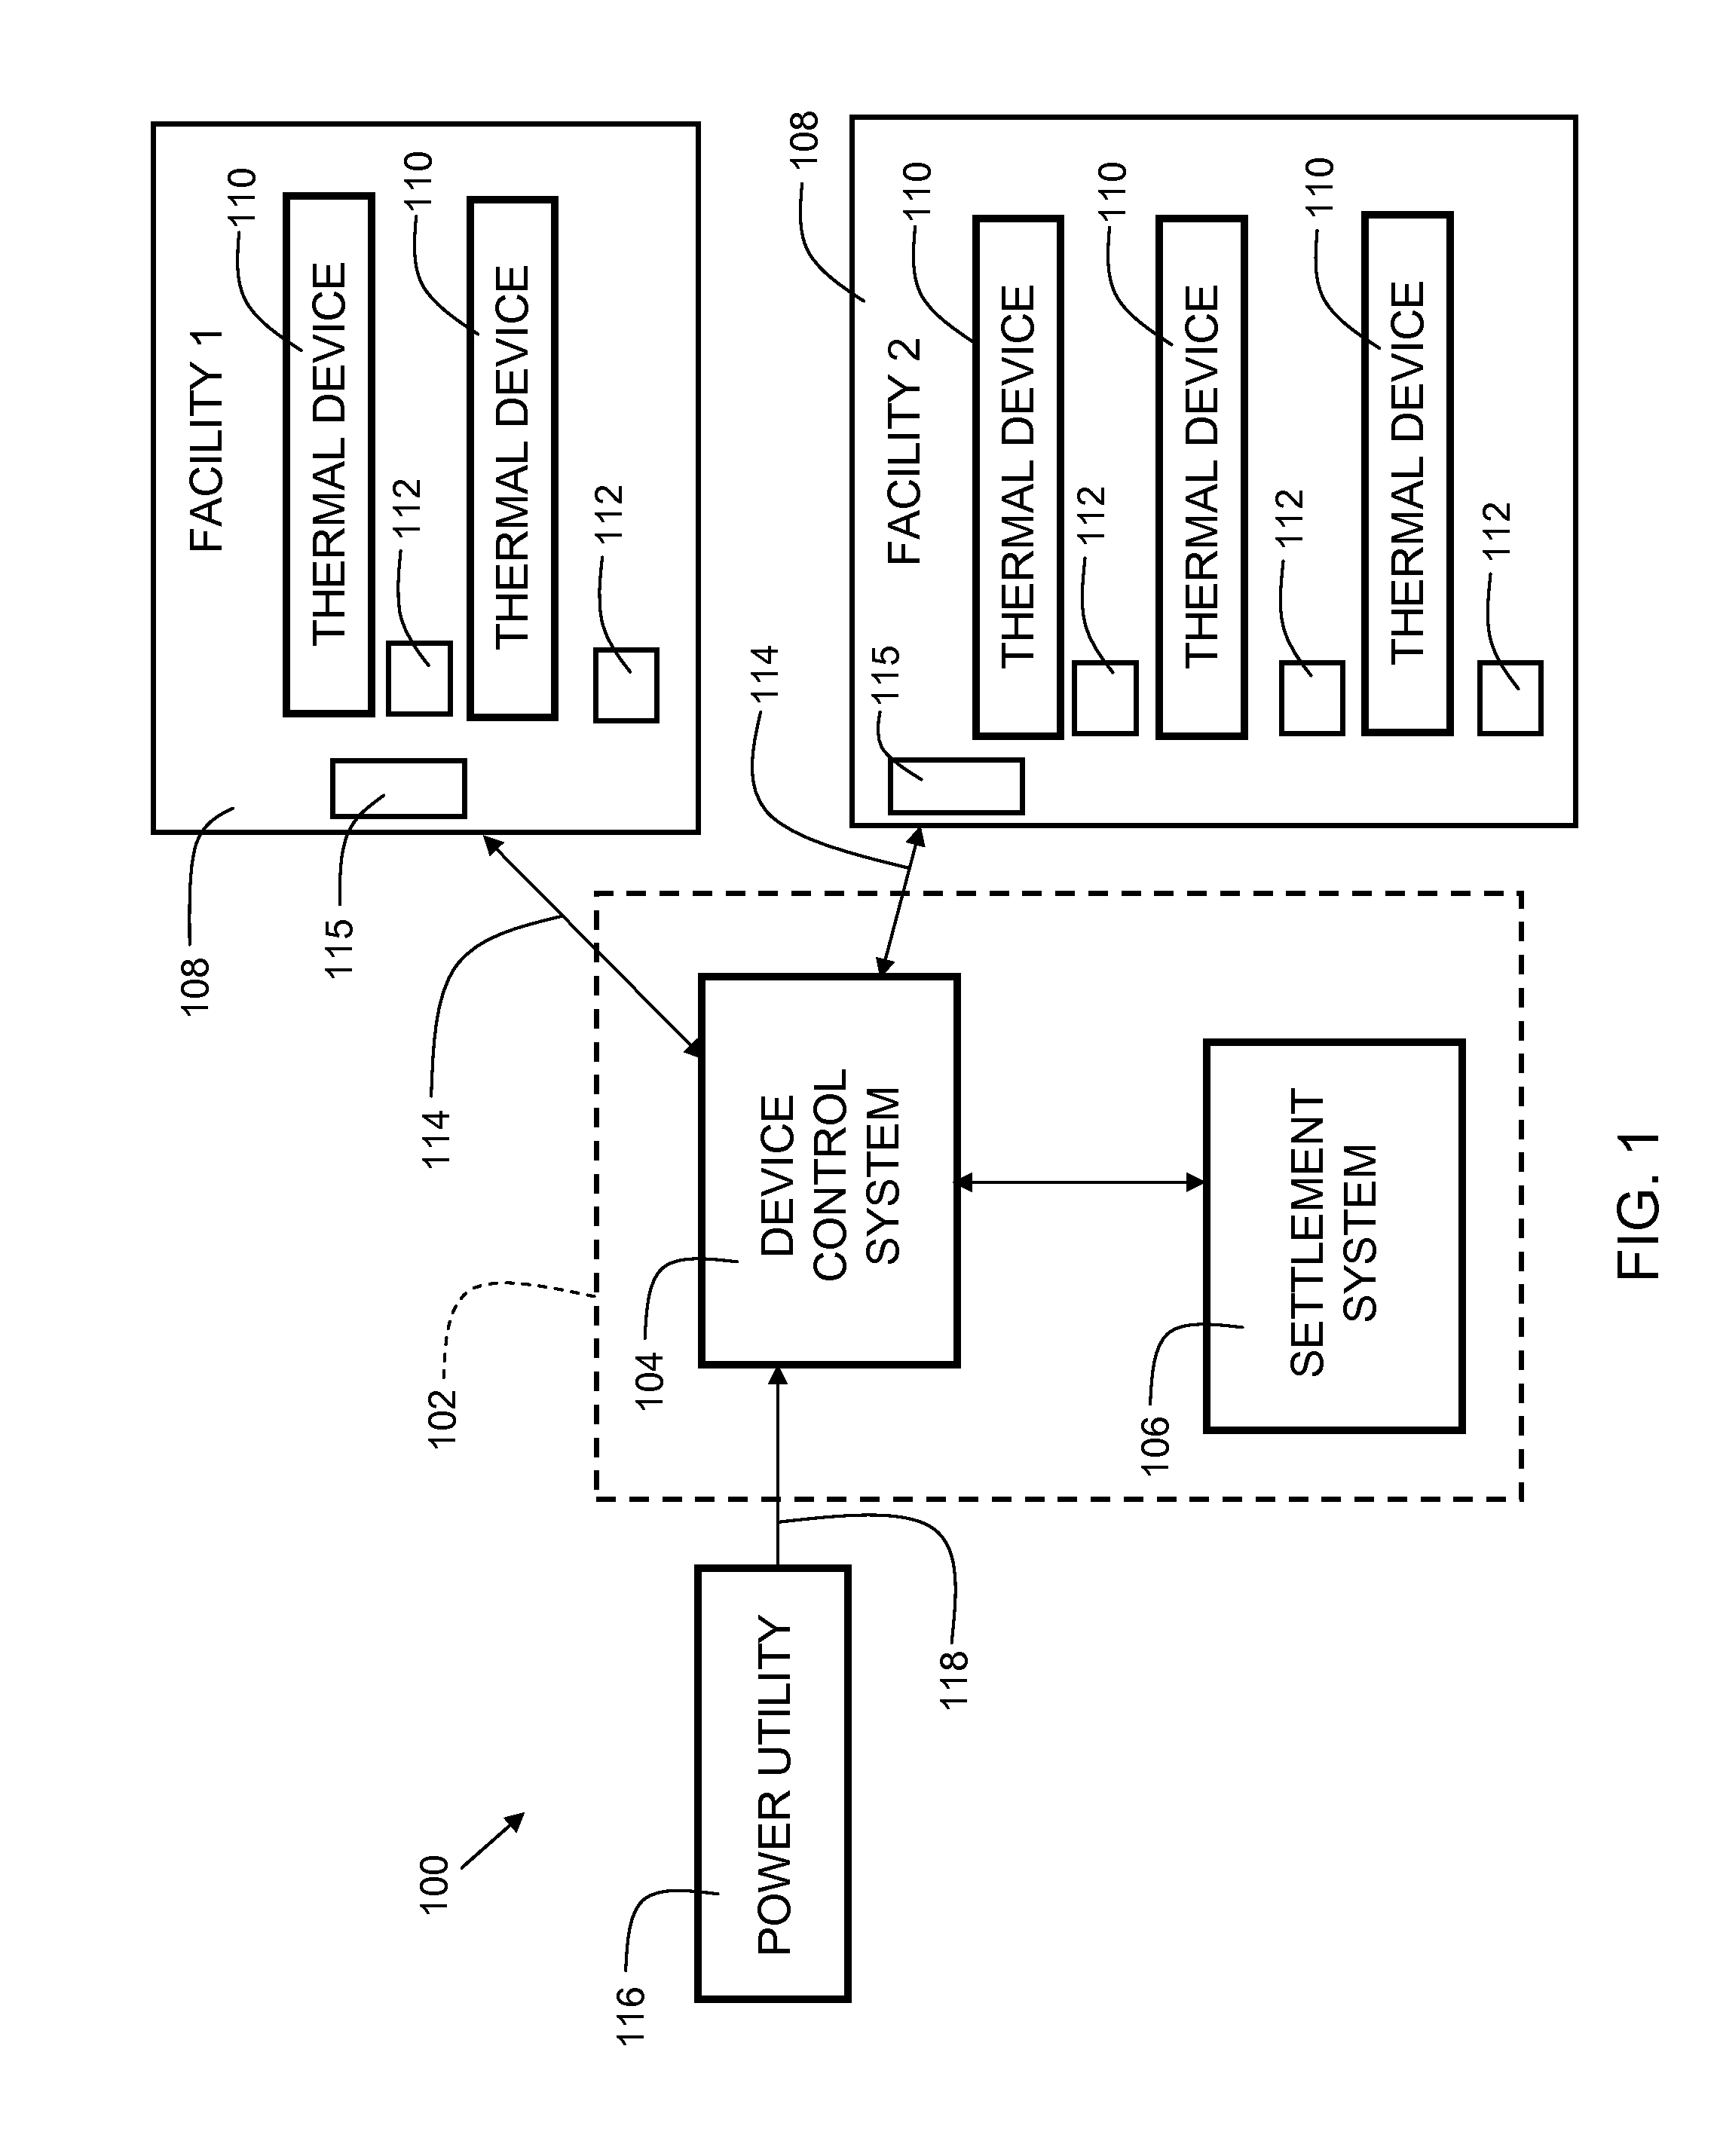 System and method for balancing supply and demand of energy on an electrical grid